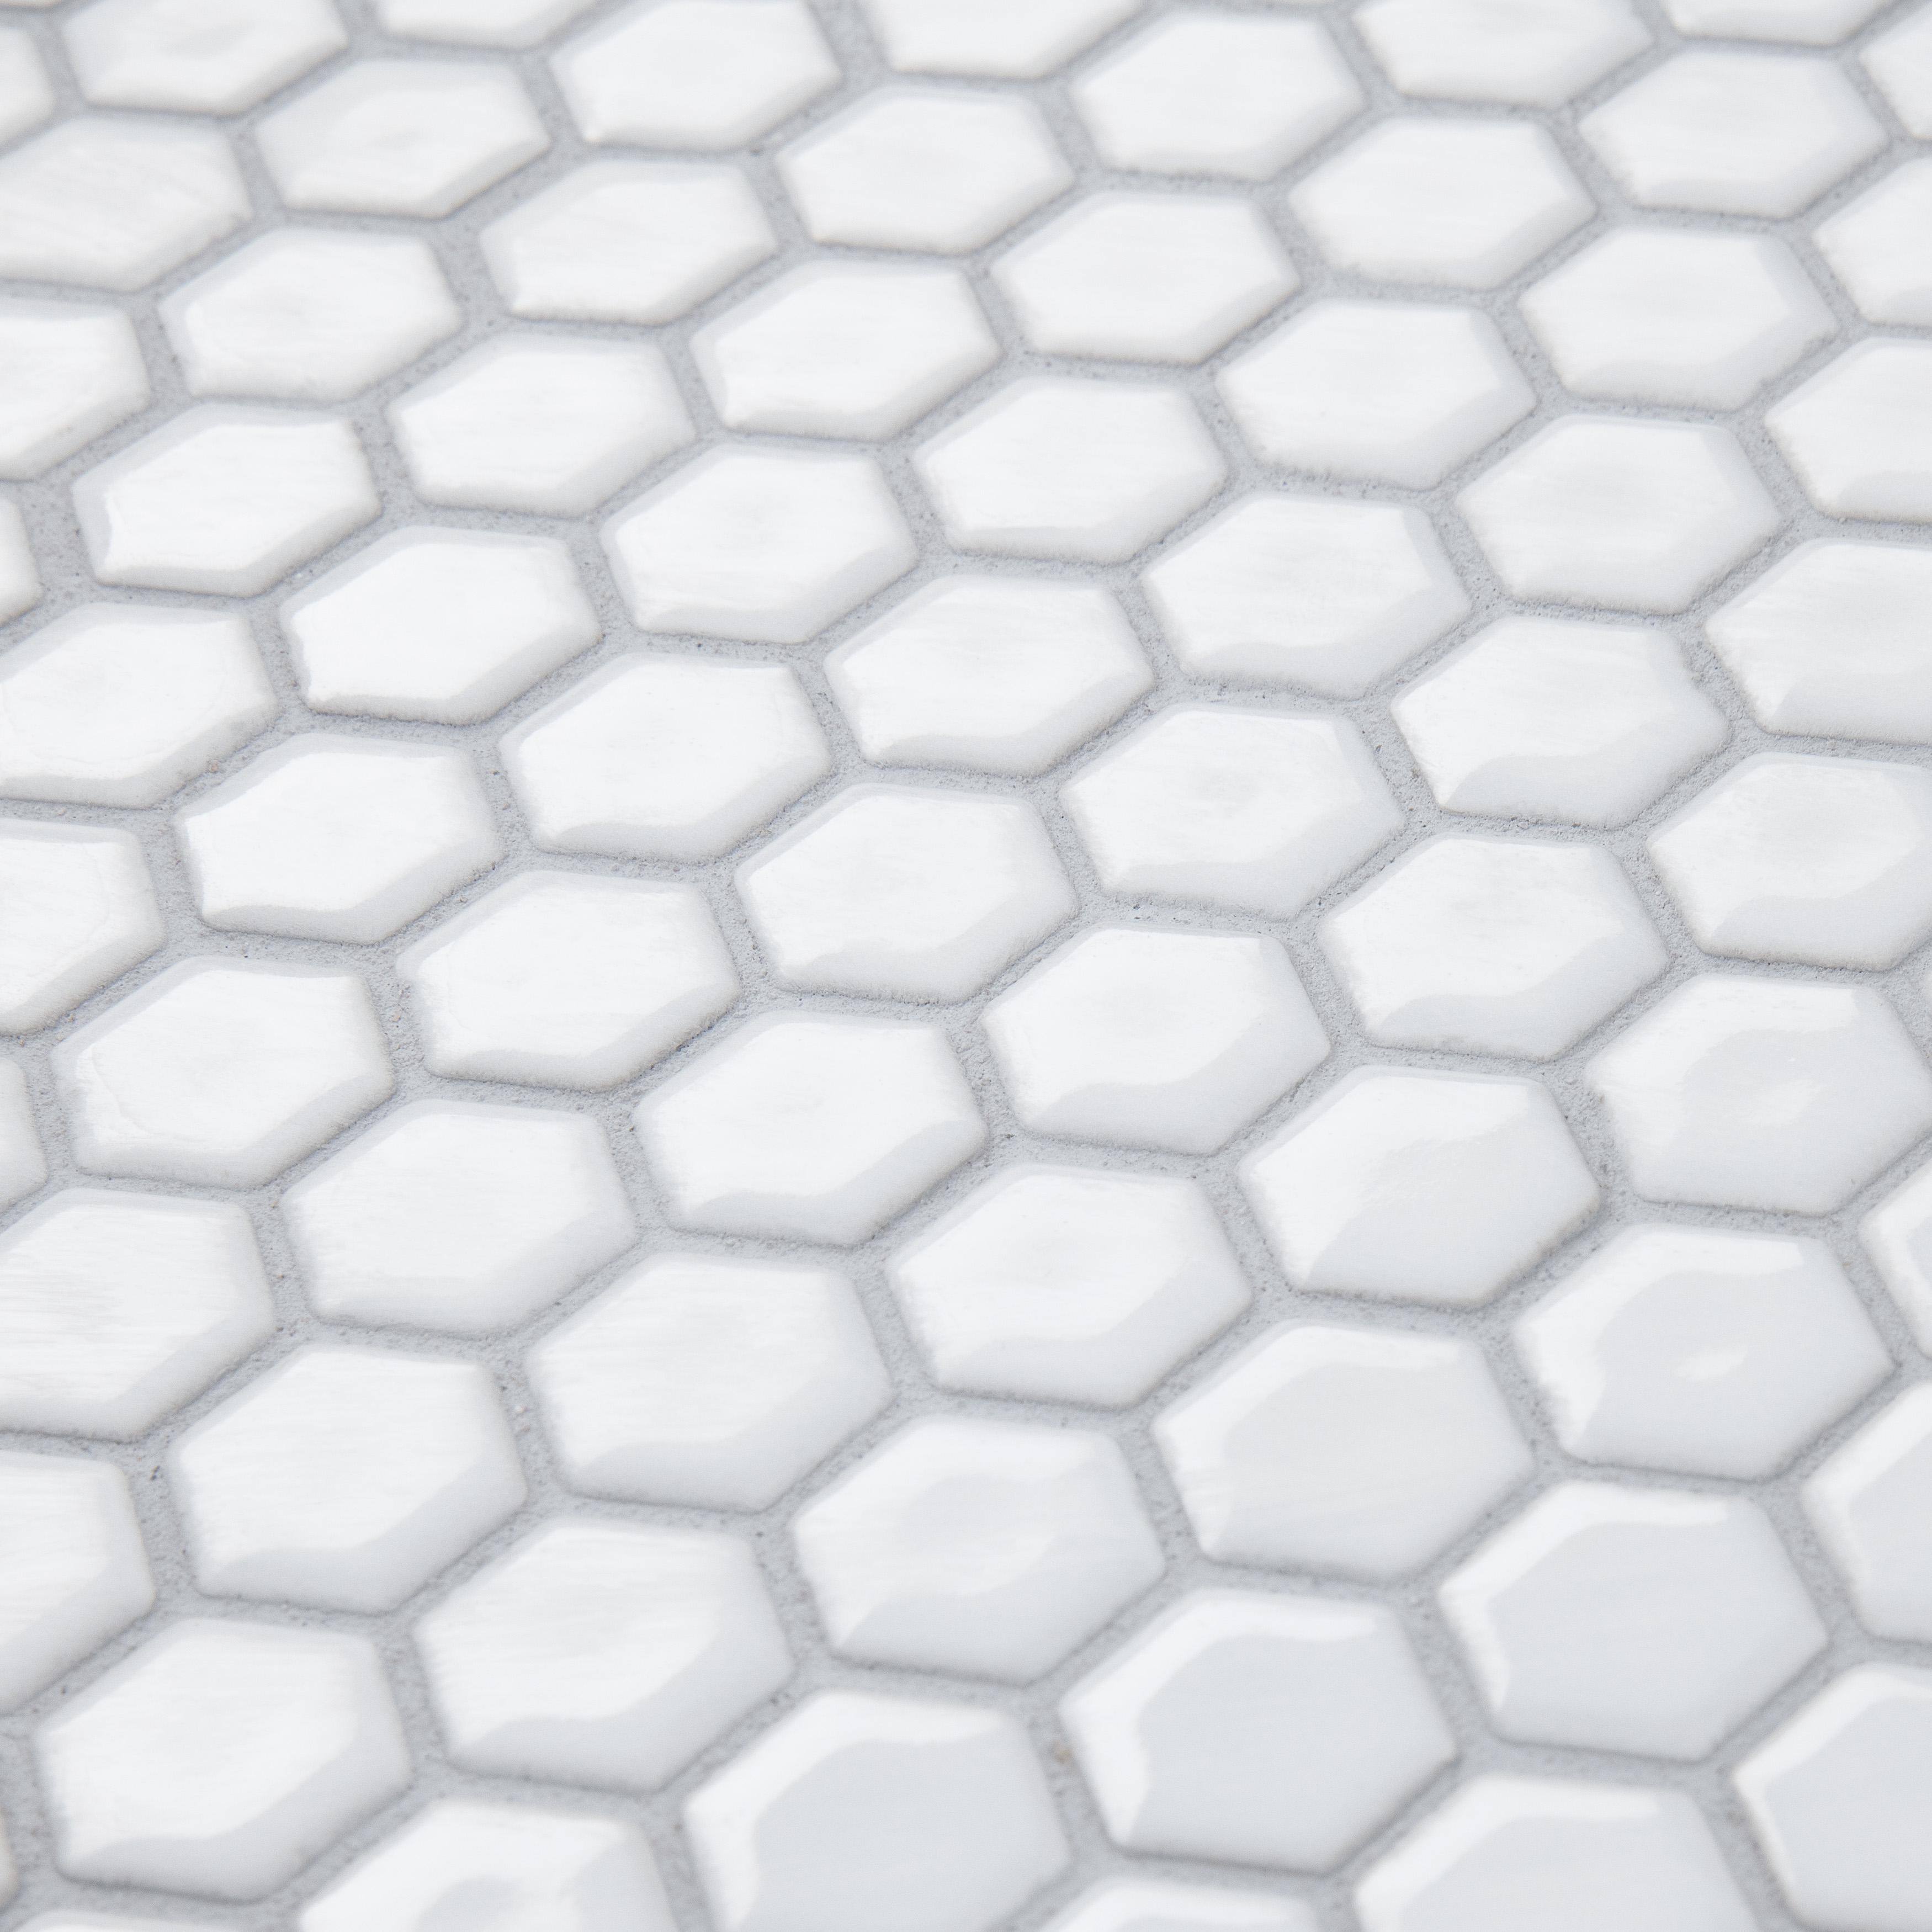 Merola Tile Colmena Hex Glossy White 11-1/2" x 11-5/8" Porcelain Floor and Wall Mosaic Tile